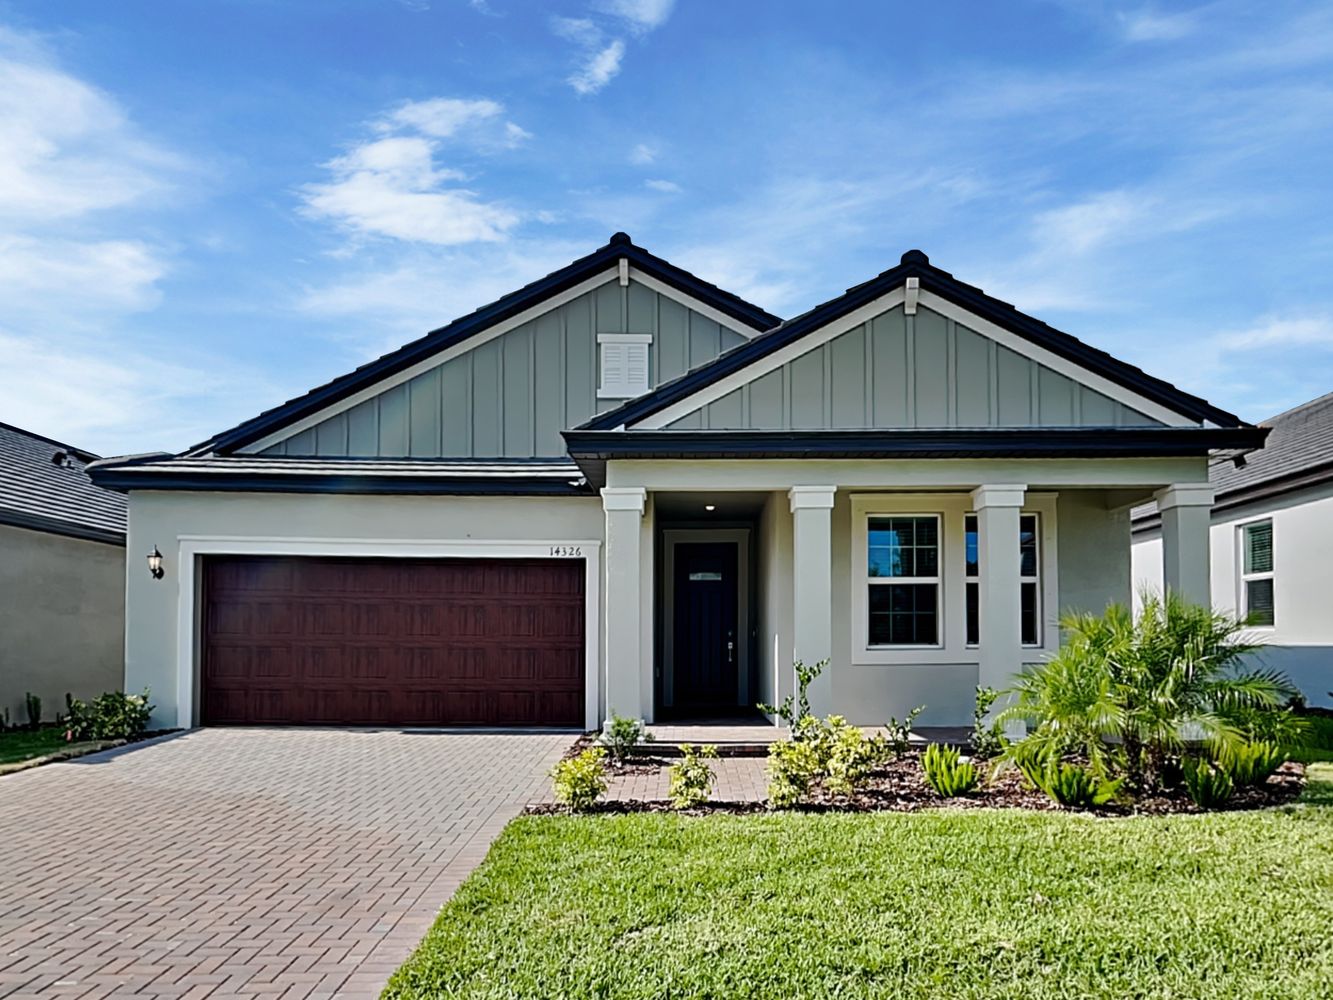 florida front of home image with a brown garage tan exterior and red brick driveway